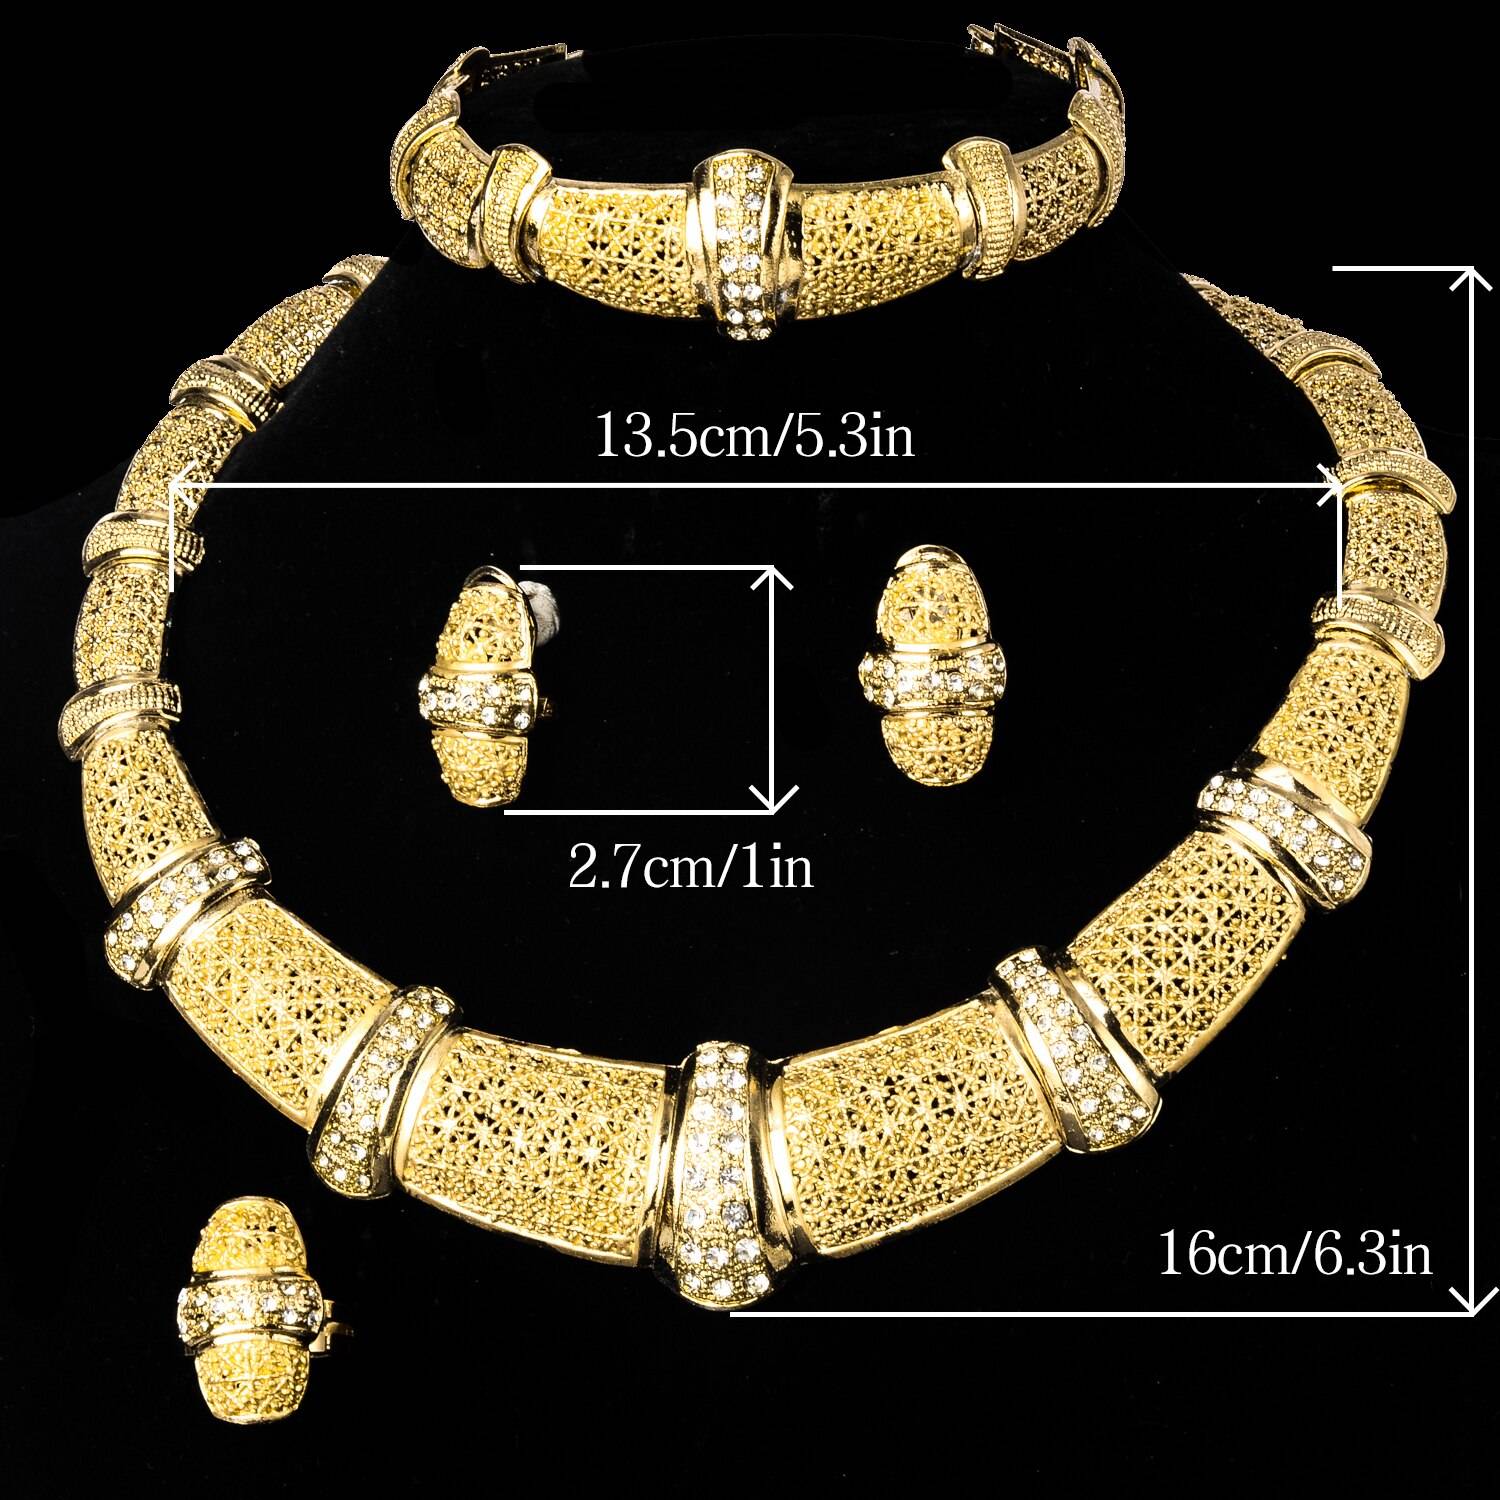 Diana baby Jewelry Sets New Fashion Gold Planted Bridal Zircon Earrings Necklace Bangle Ring For Women Classic Trendy Gift Wedding Jewellery Set 8d255f28538fbae46aeae7: Jewelry Sets